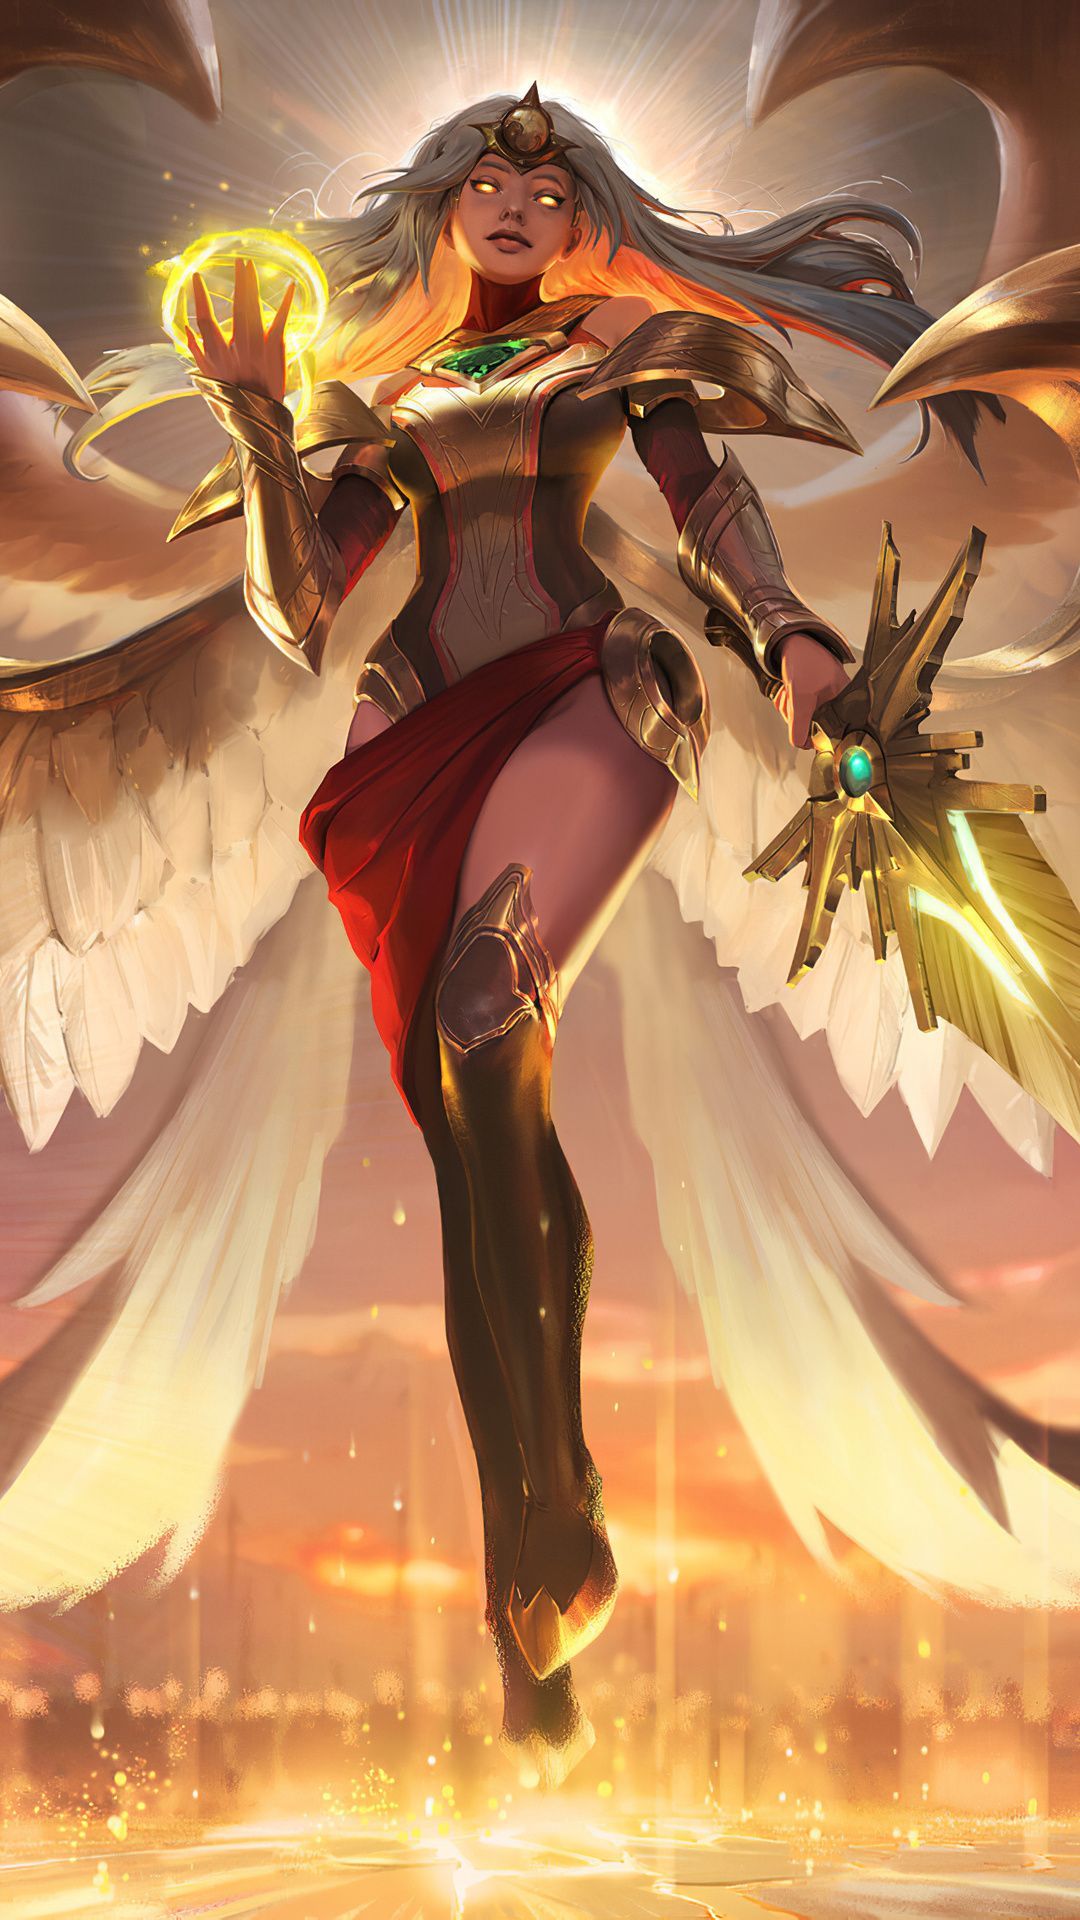 Kayle League Of Legends 4k Mobile Wallpaper iPhone, Android